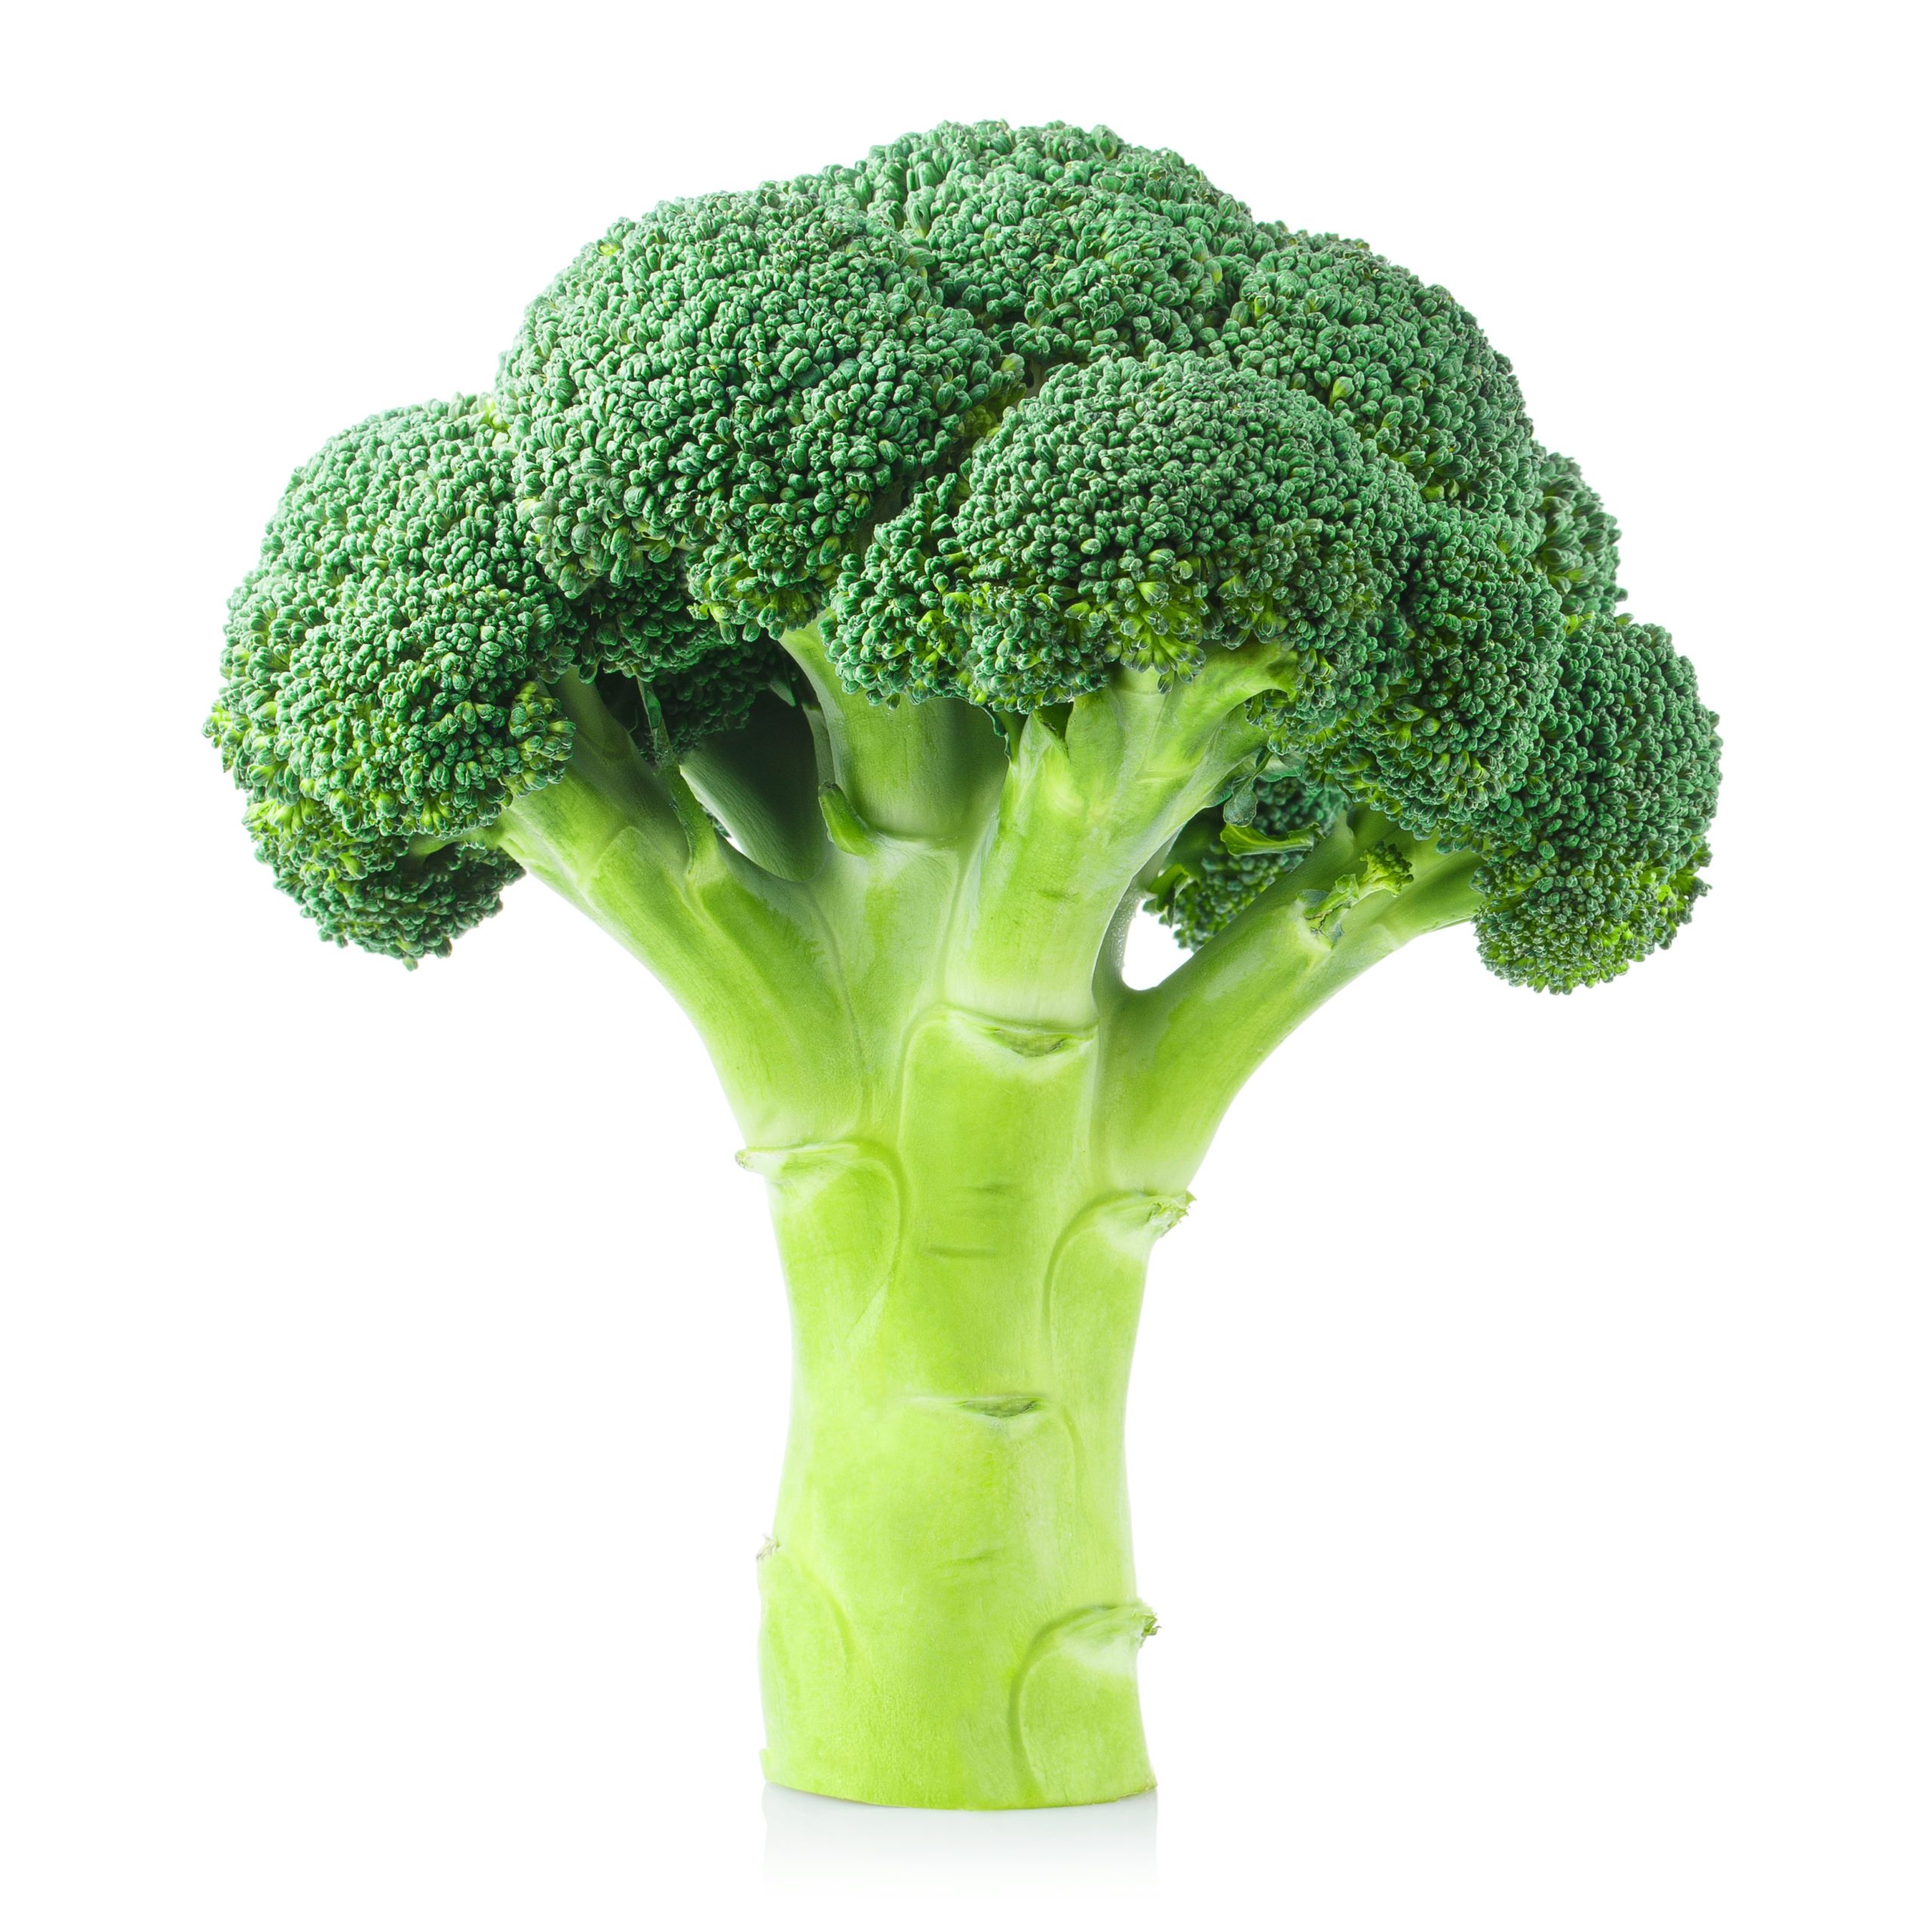 picture of broccoli on white background